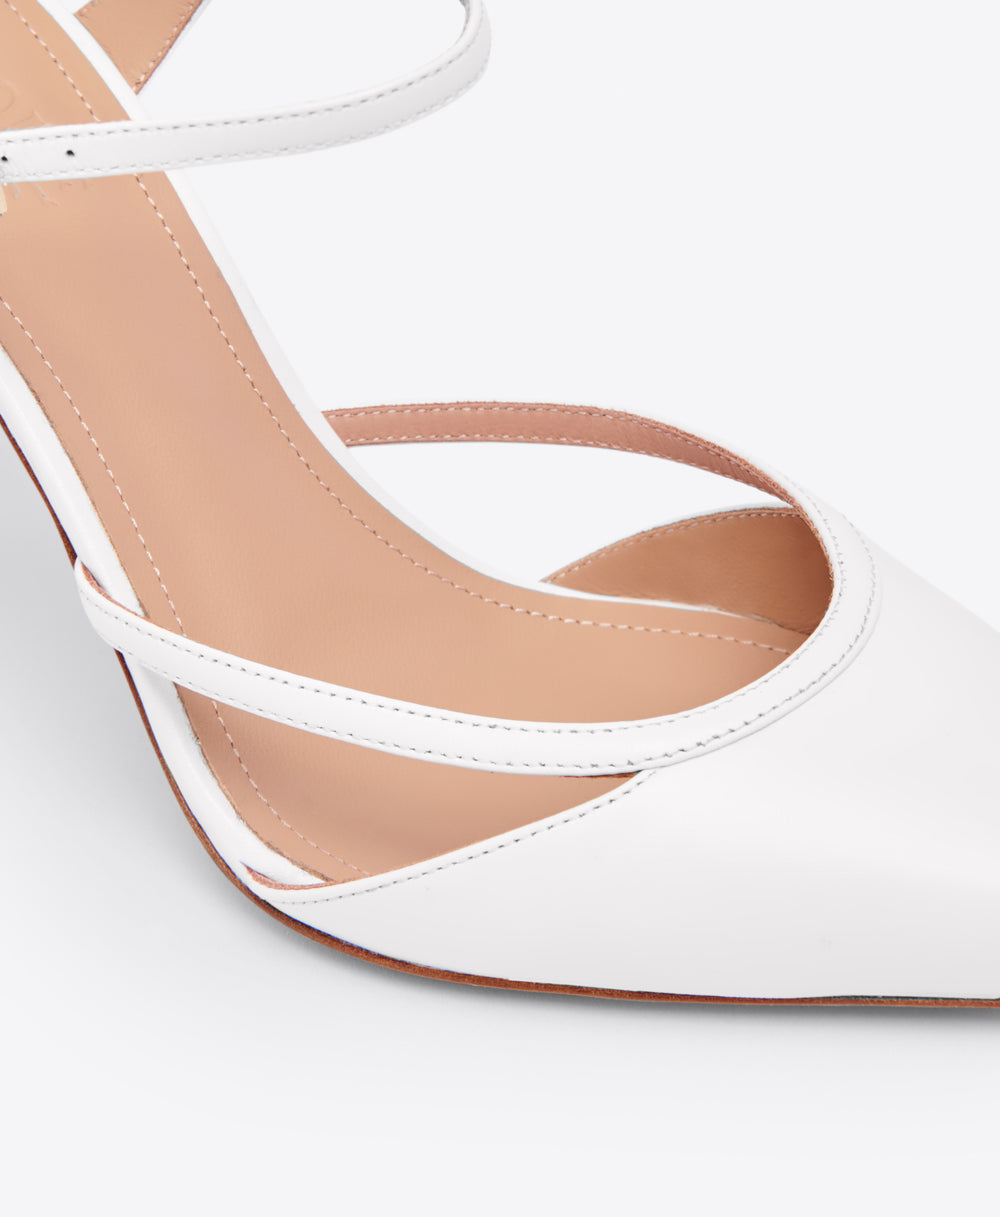 Yola 90 White Leather Mules with Mini Straps Malone Souliers